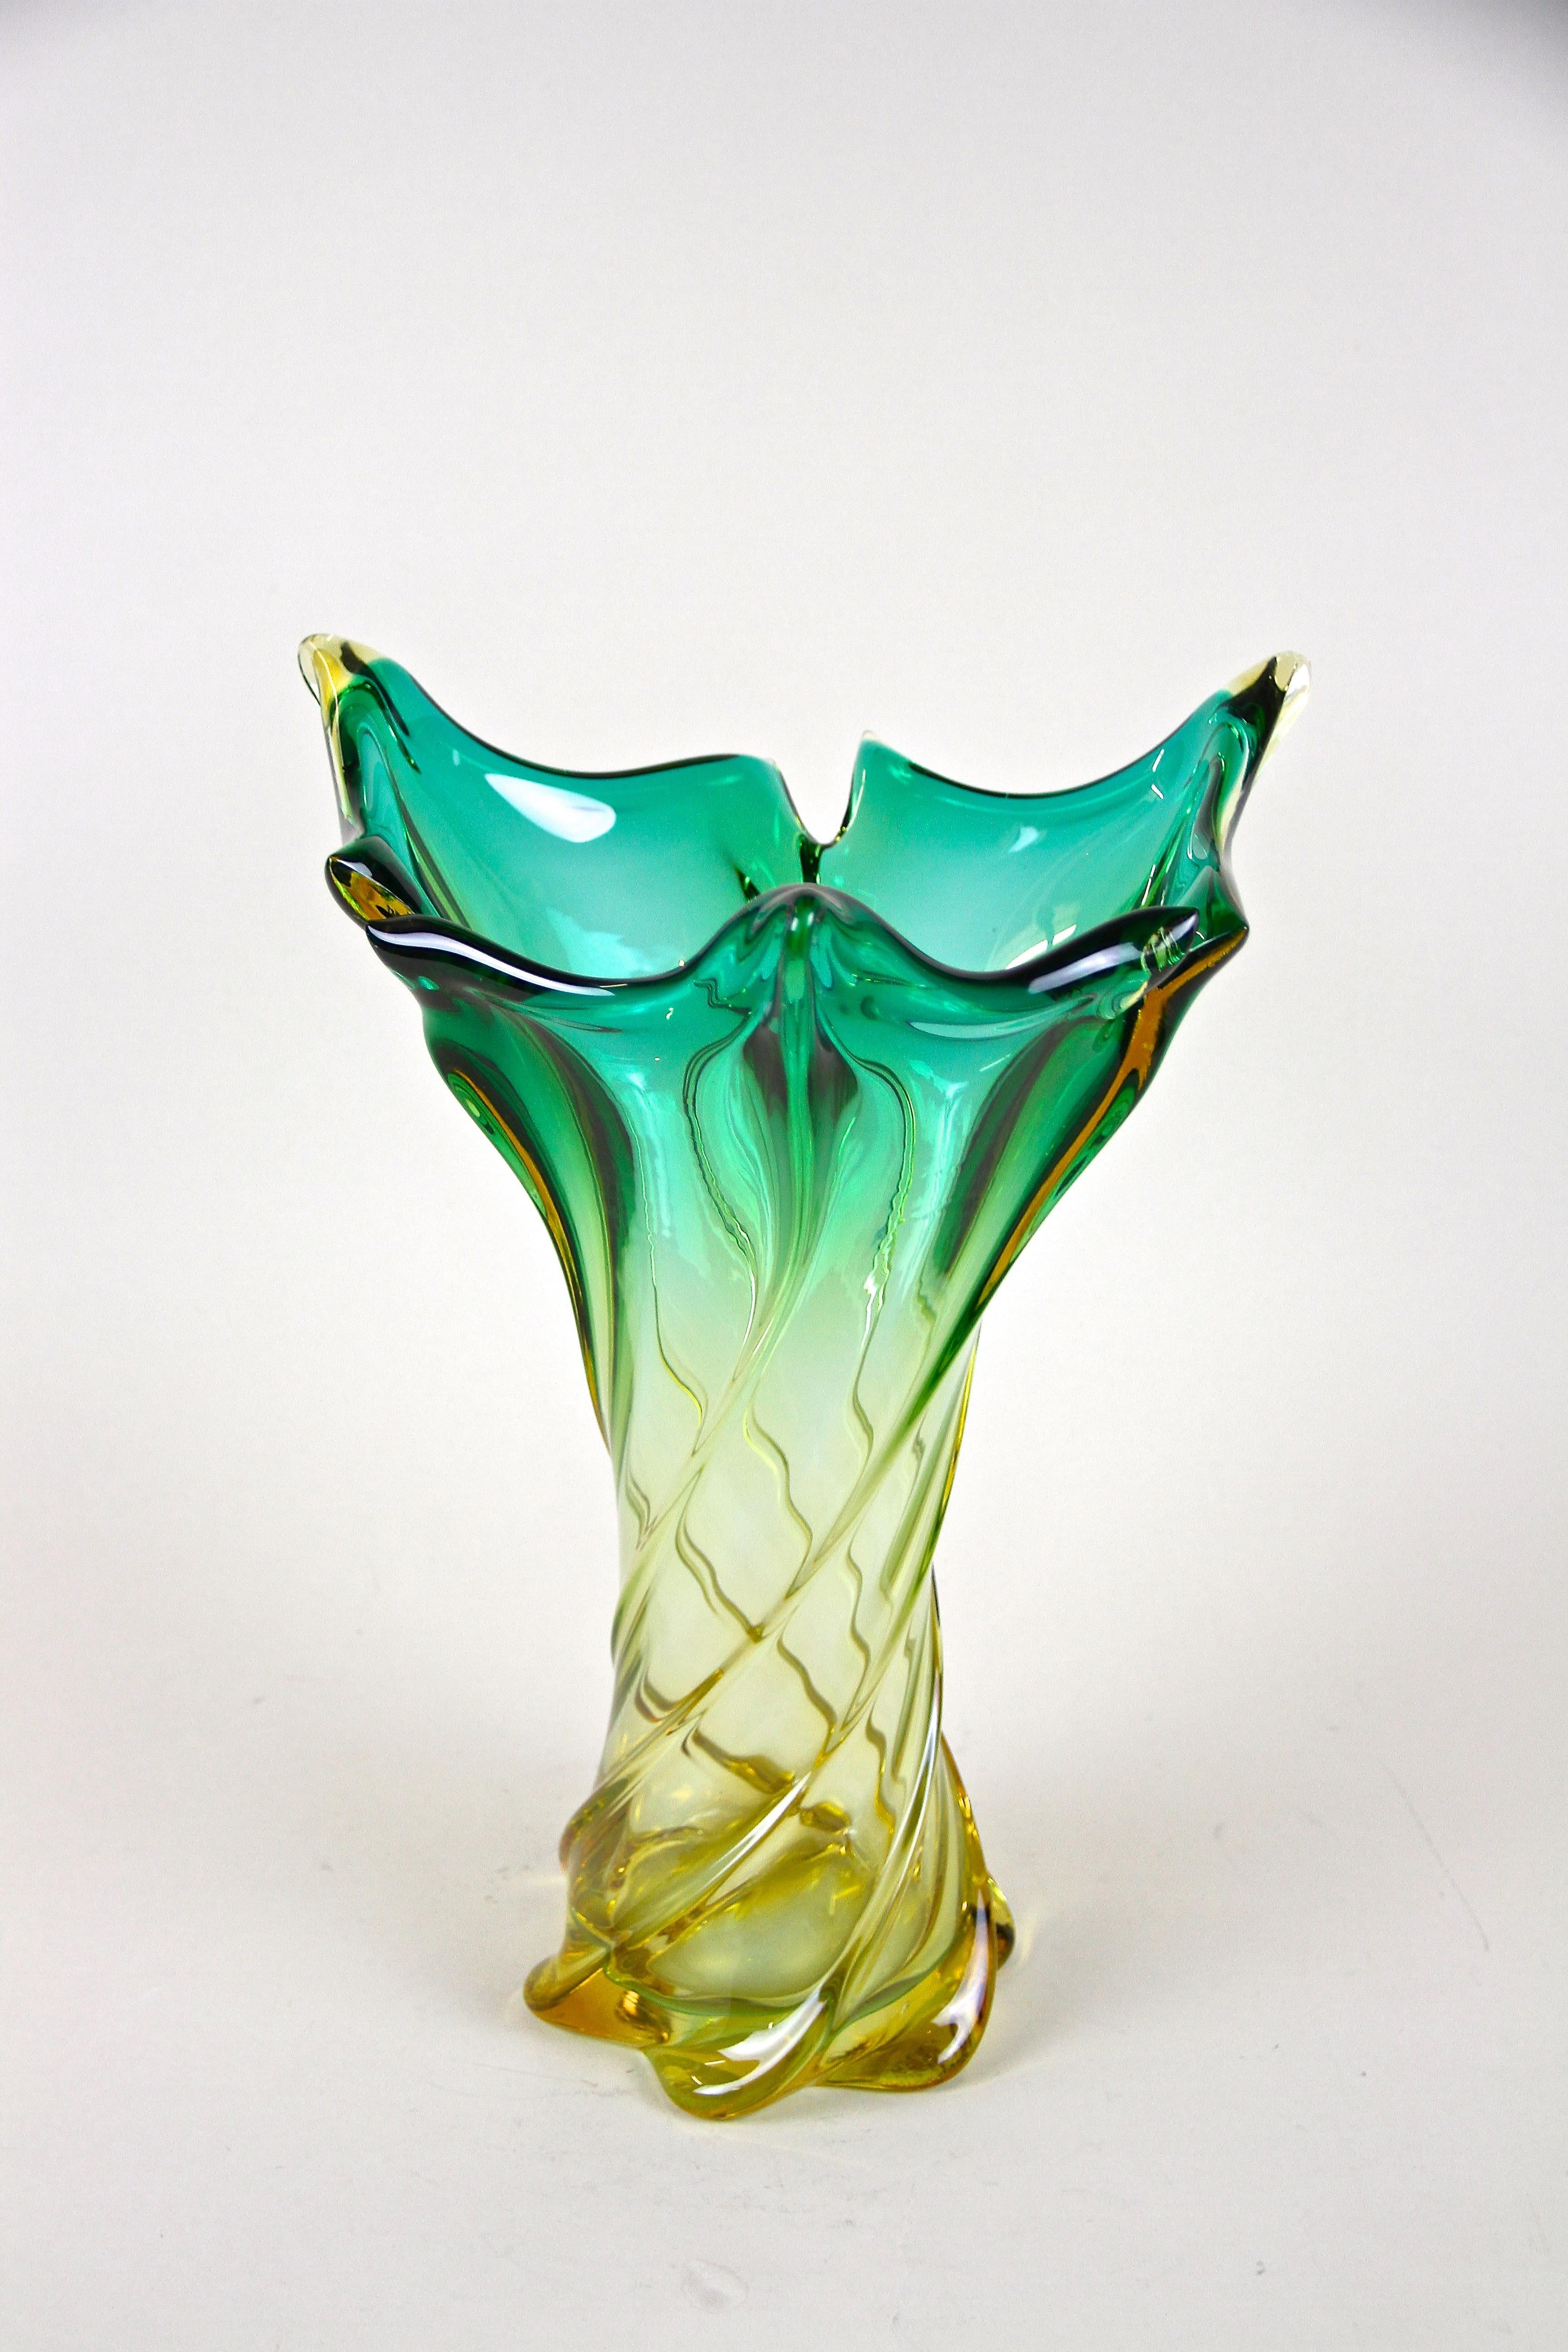 Beautifully shaped, large mid-century Murano glass vase from the renown workshops in Italy around 1960. An exceptional item with twisted body combined with fantastic coloration. From shining green tones over yellow down to a beautiful amber colored